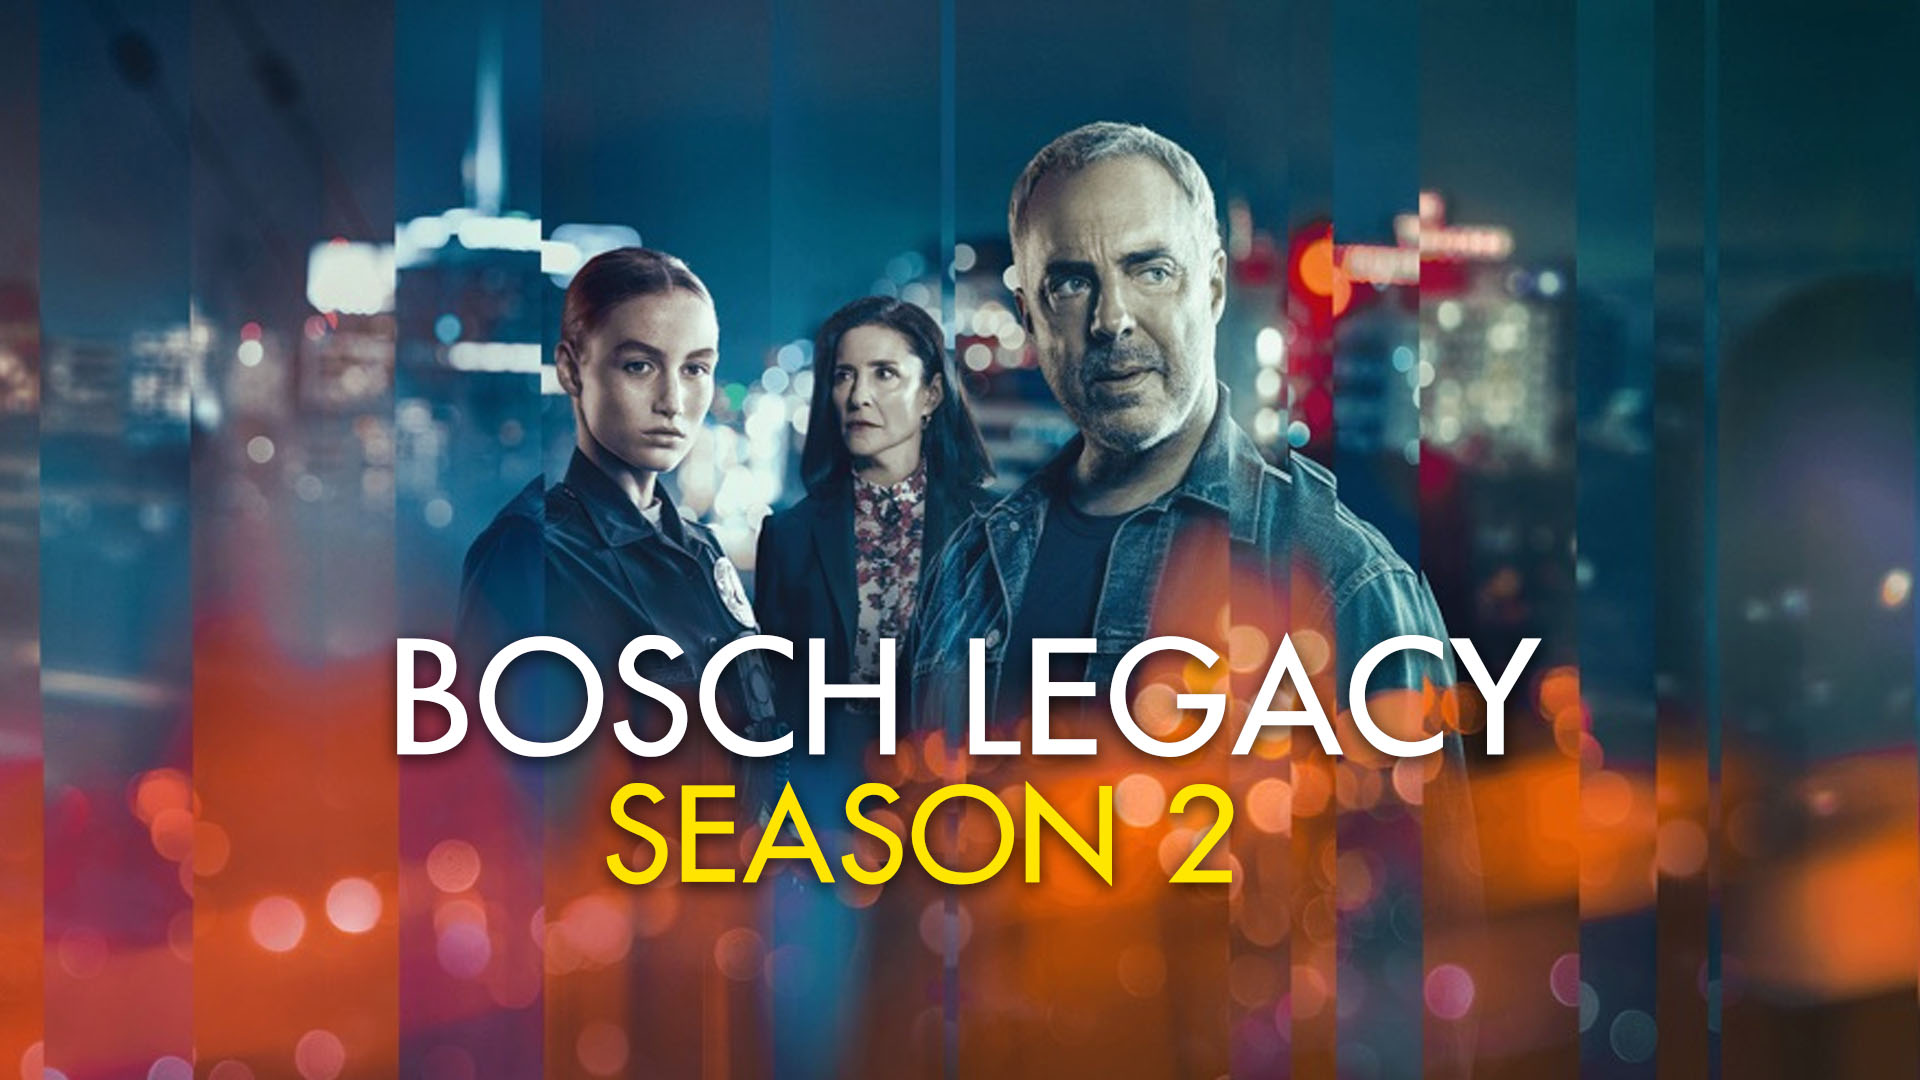 Bosch Legacy Season Premiere Every Detail You Need To Know About Daily Research Plot